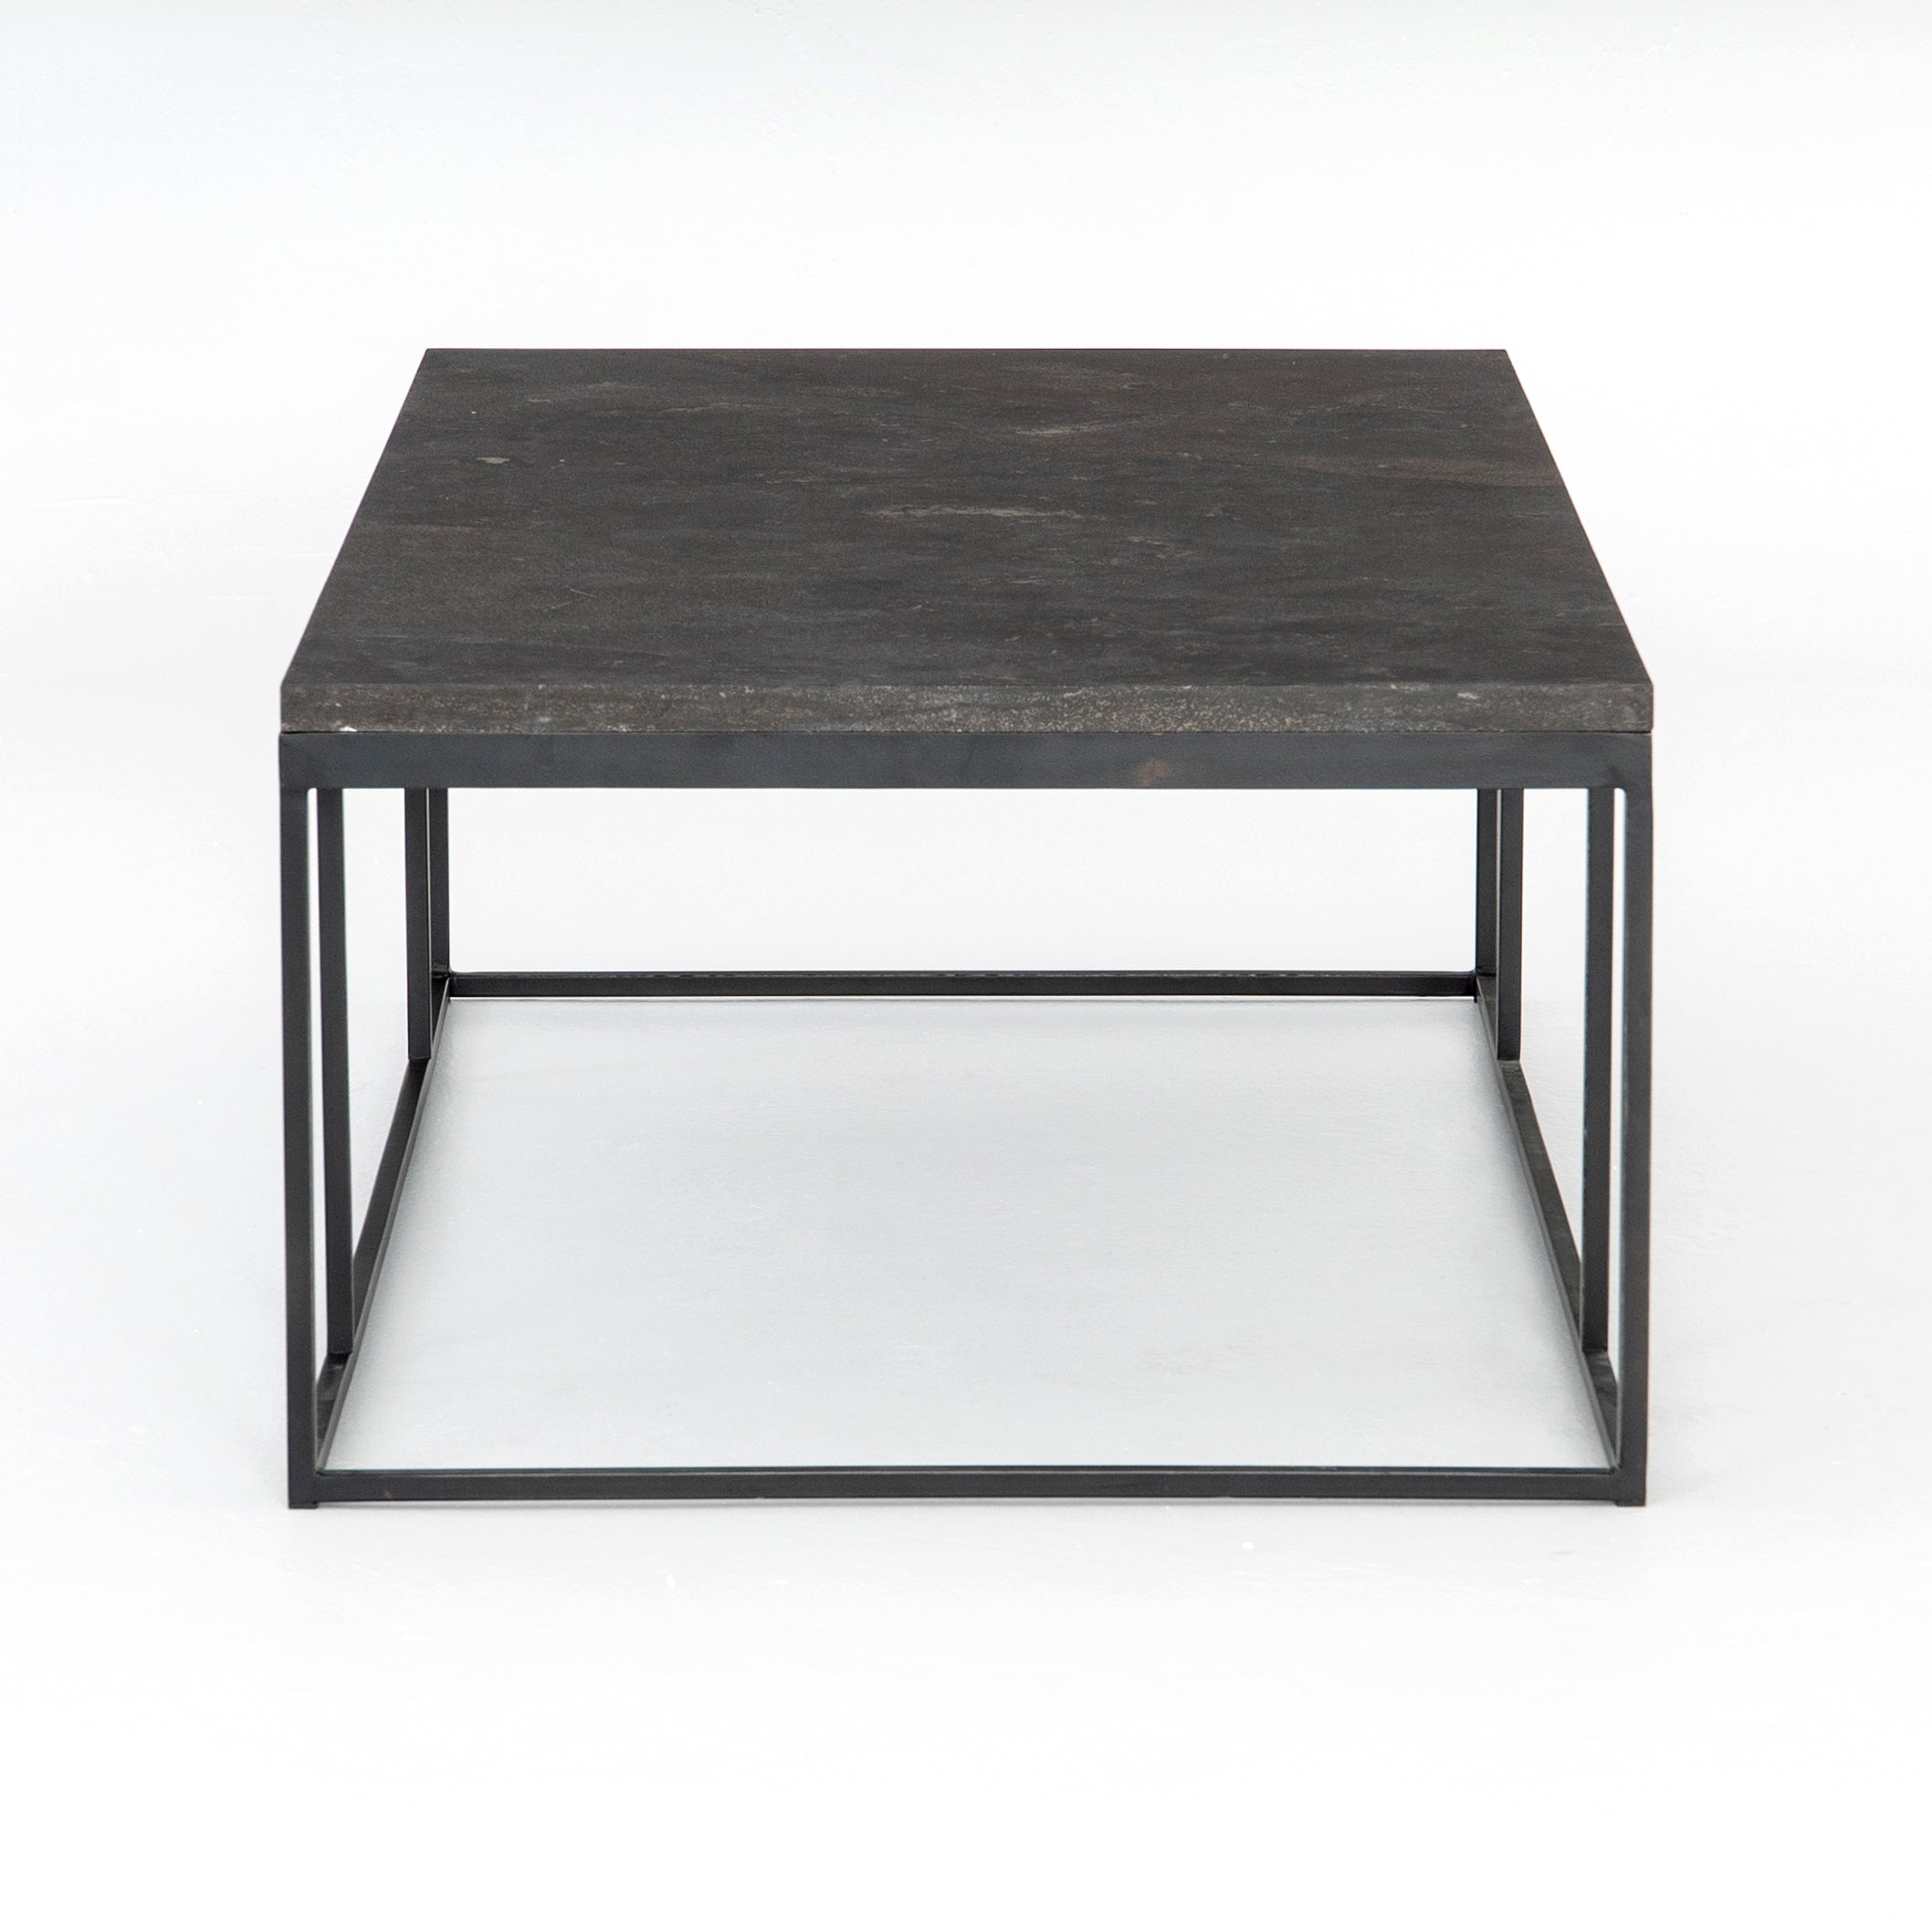 Spare beauty, casual elegance with the Harlow Bluestone Small Coffee Table. A gunmetal Parson's base with hand-rubbed, dimensional edges supports a rough-hewn bluestone slab that feels found and perfectly placed.  Size: 60"w x 28"d x 17"h Materials: Iron, Limestone